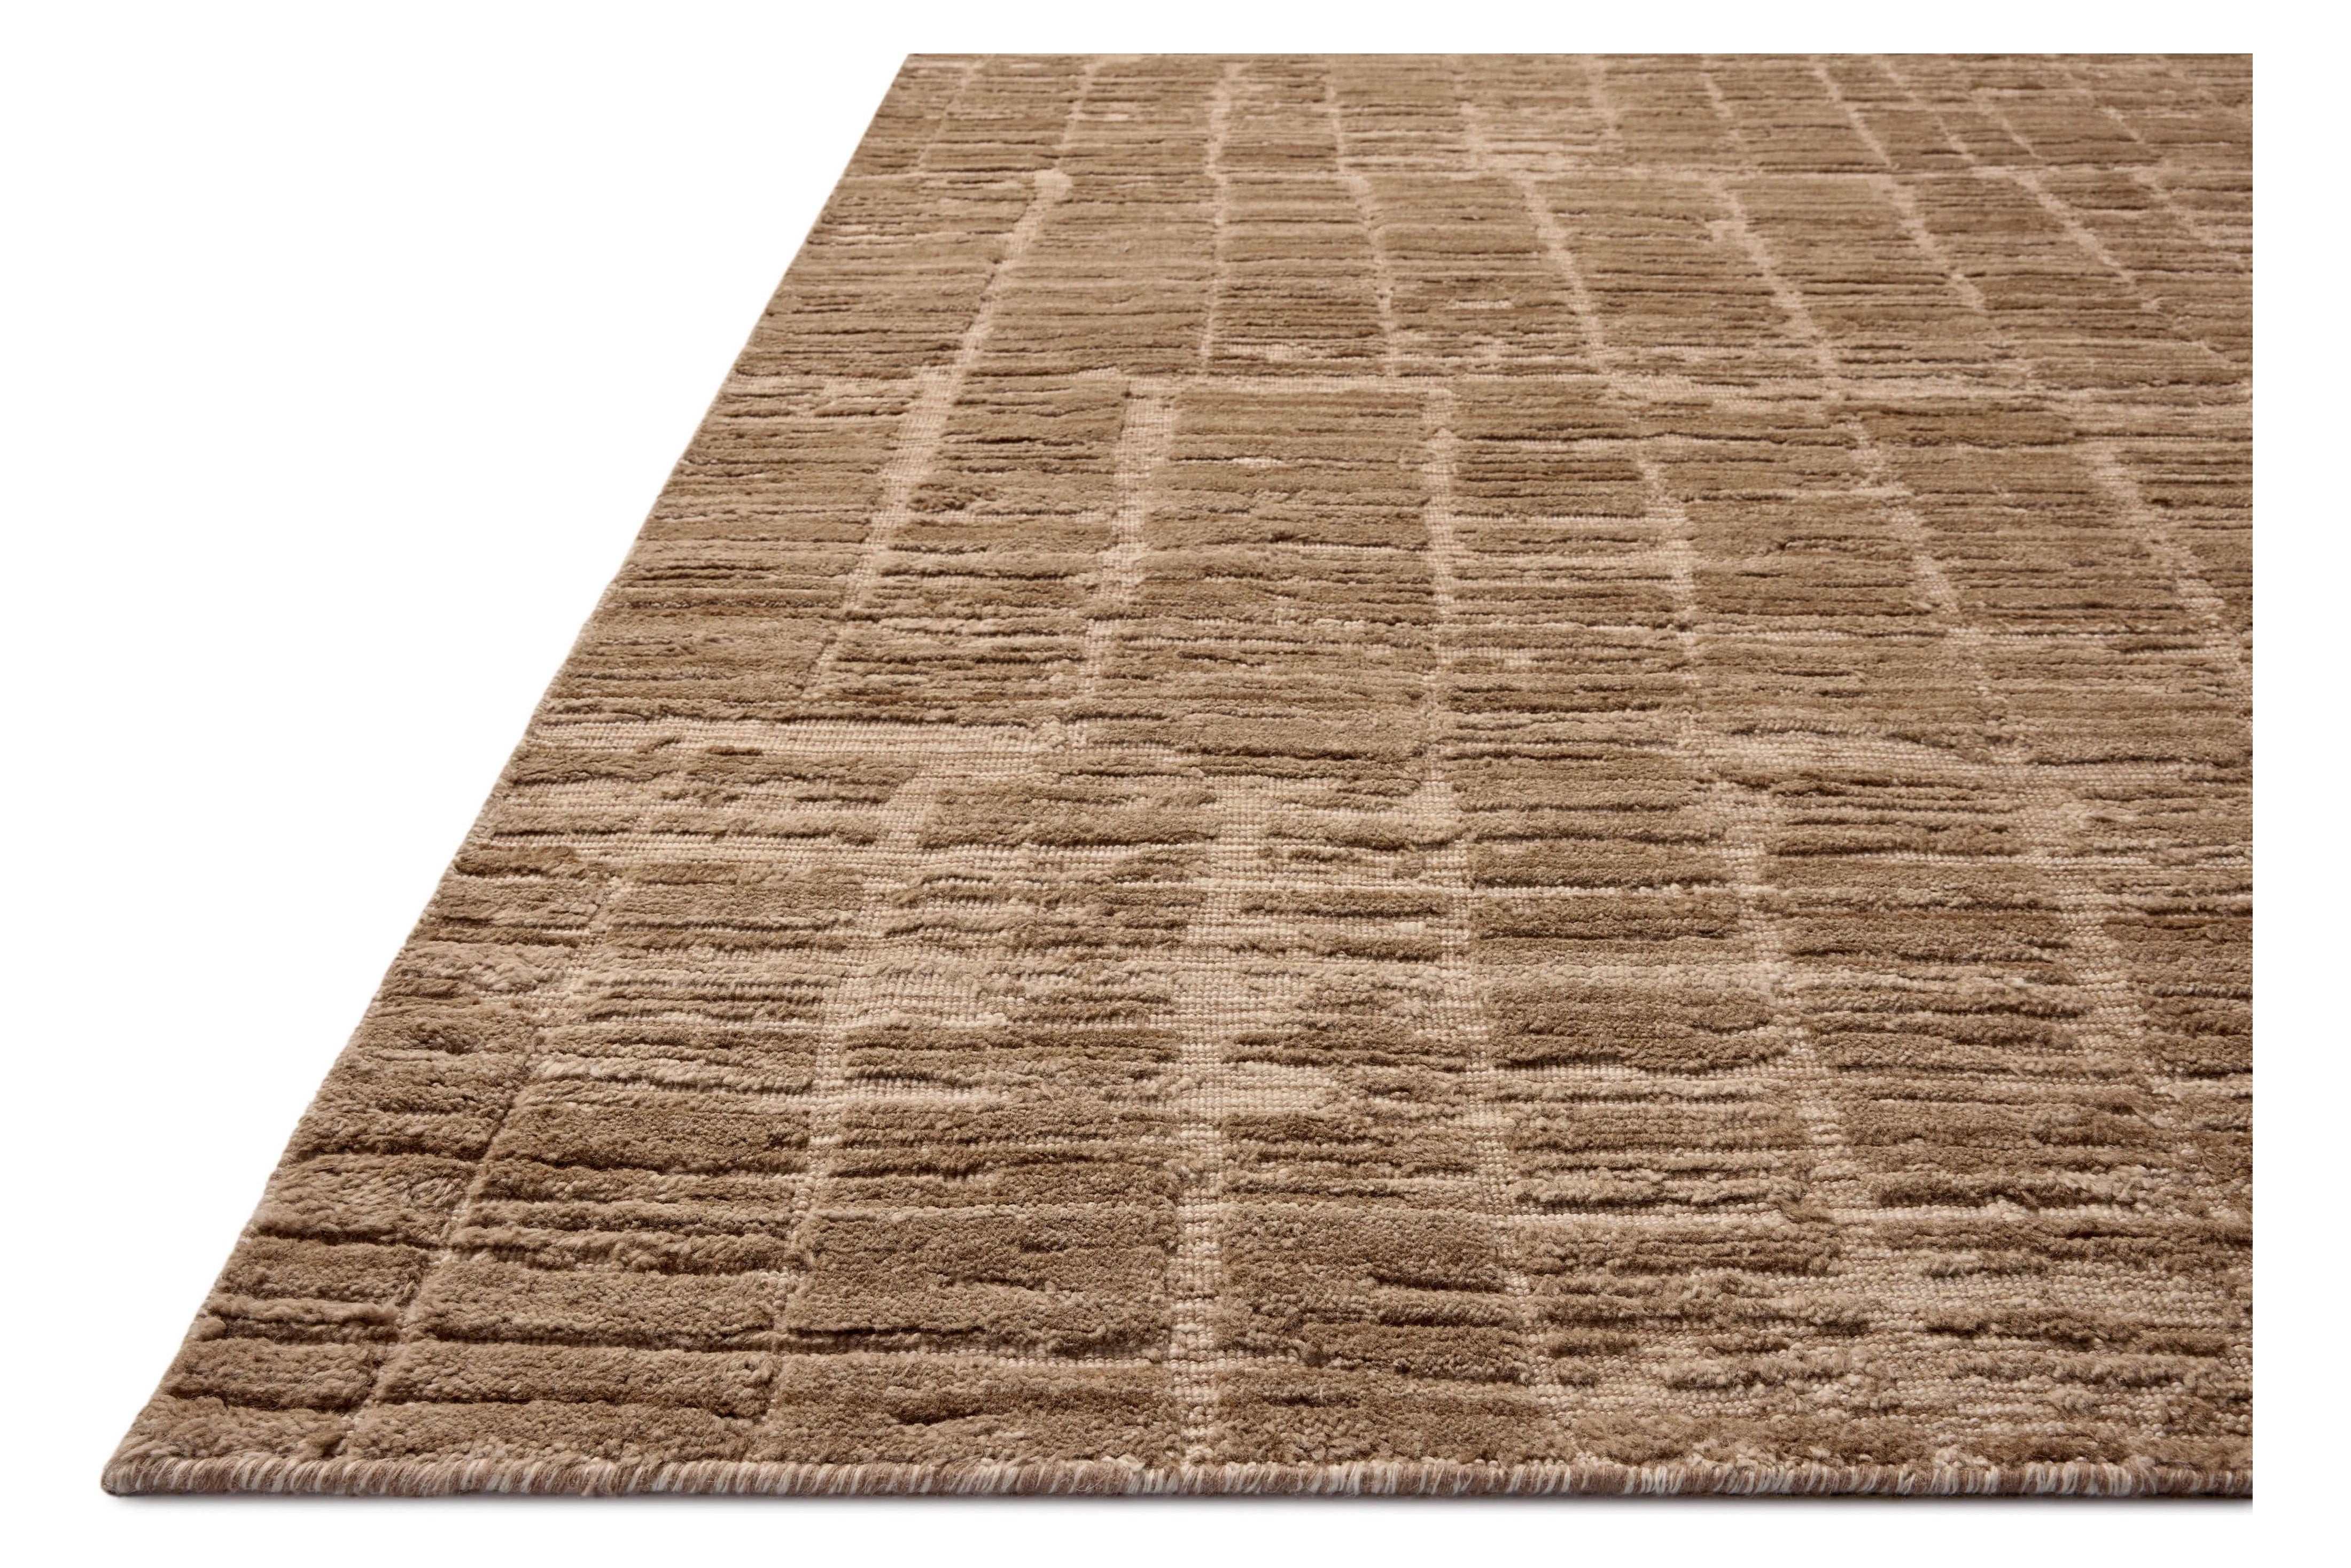 Area rugs in the Daniel Fawn Rug have a graphic design in a range of tonal palettes with a soft, gently ribbed texture. The hand-loomed pile is a blend of bamboo and wool with a slight sheen that captures the light and changes the rug’s sense of depth throughout the day. Amethyst Home provides interior design, new home construction design consulting, vintage area rugs, and lighting in the Salt Lake City metro area.